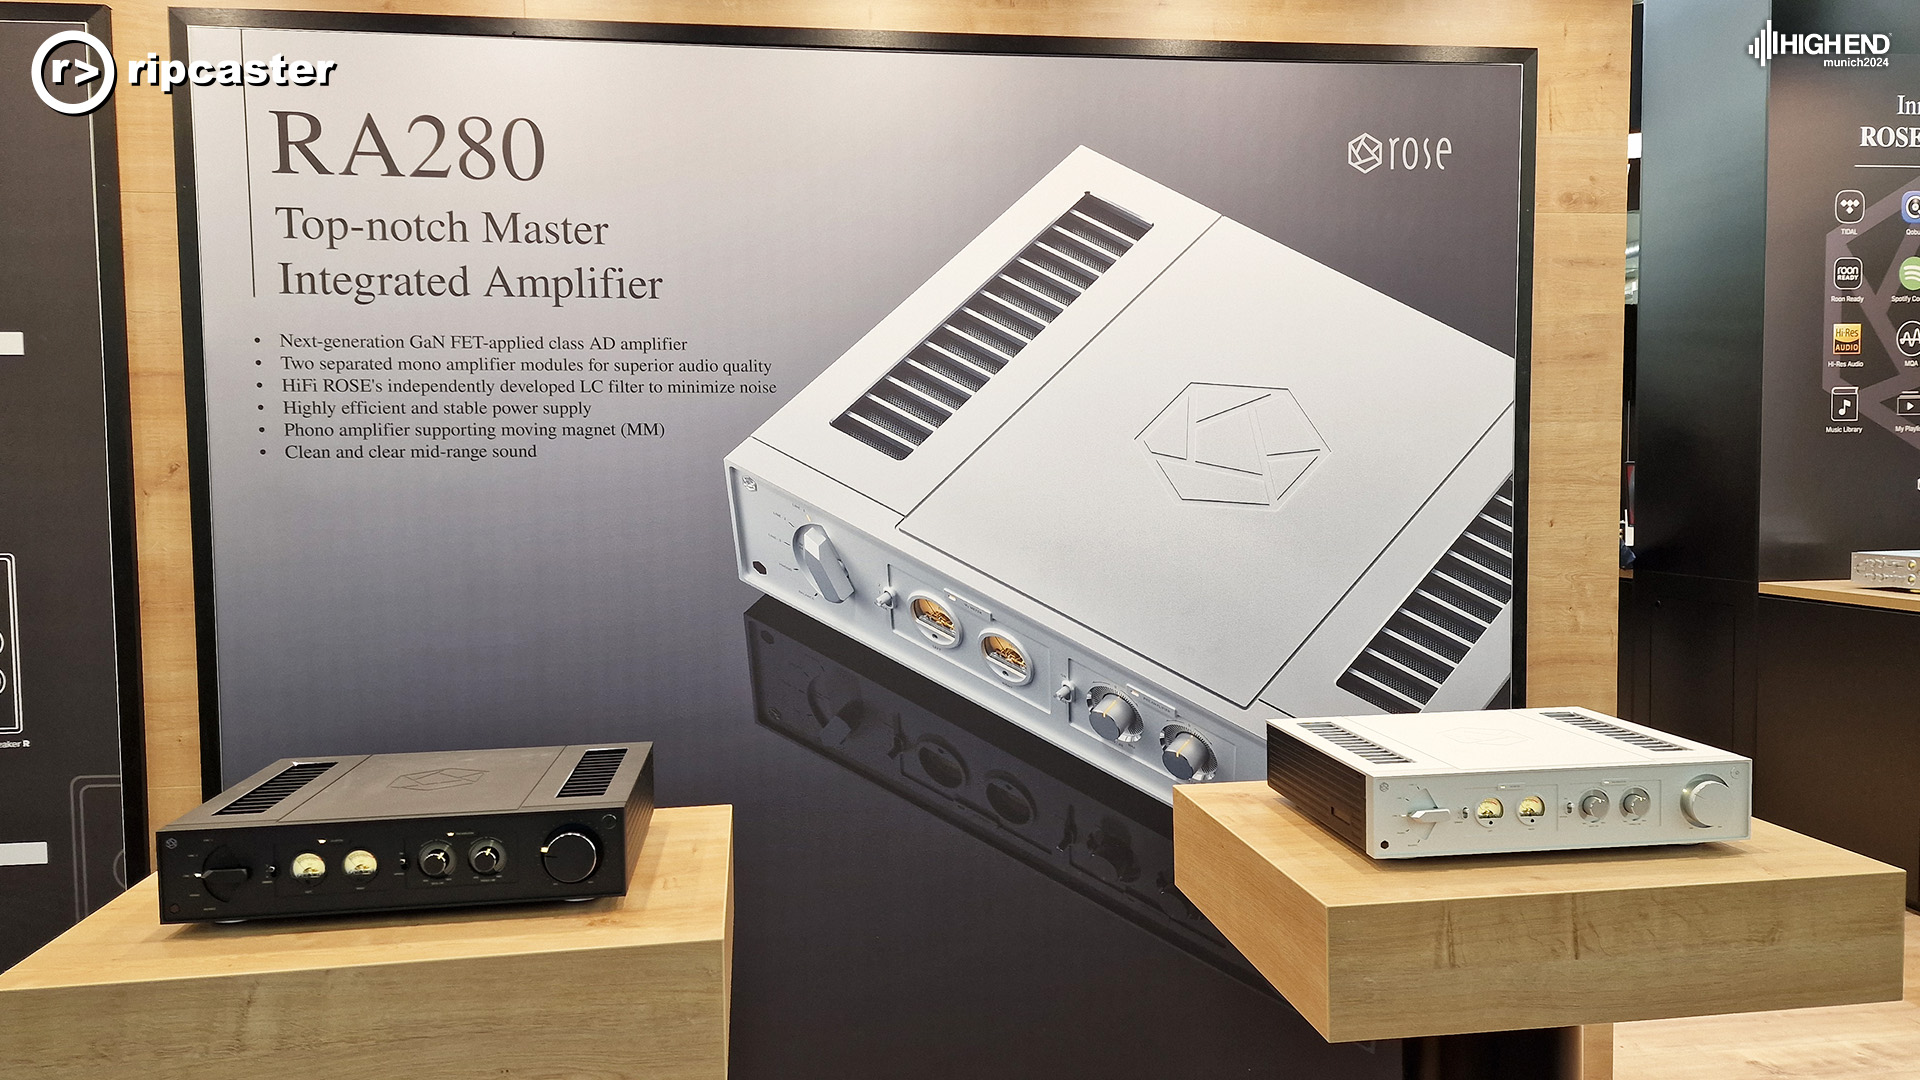 Two pieces of HiFi Rose equipment - the RA280.  The silver one to the right on a wooden stand and the black one to the left on a wooden stand.  There's a big sign behind with some key features listed